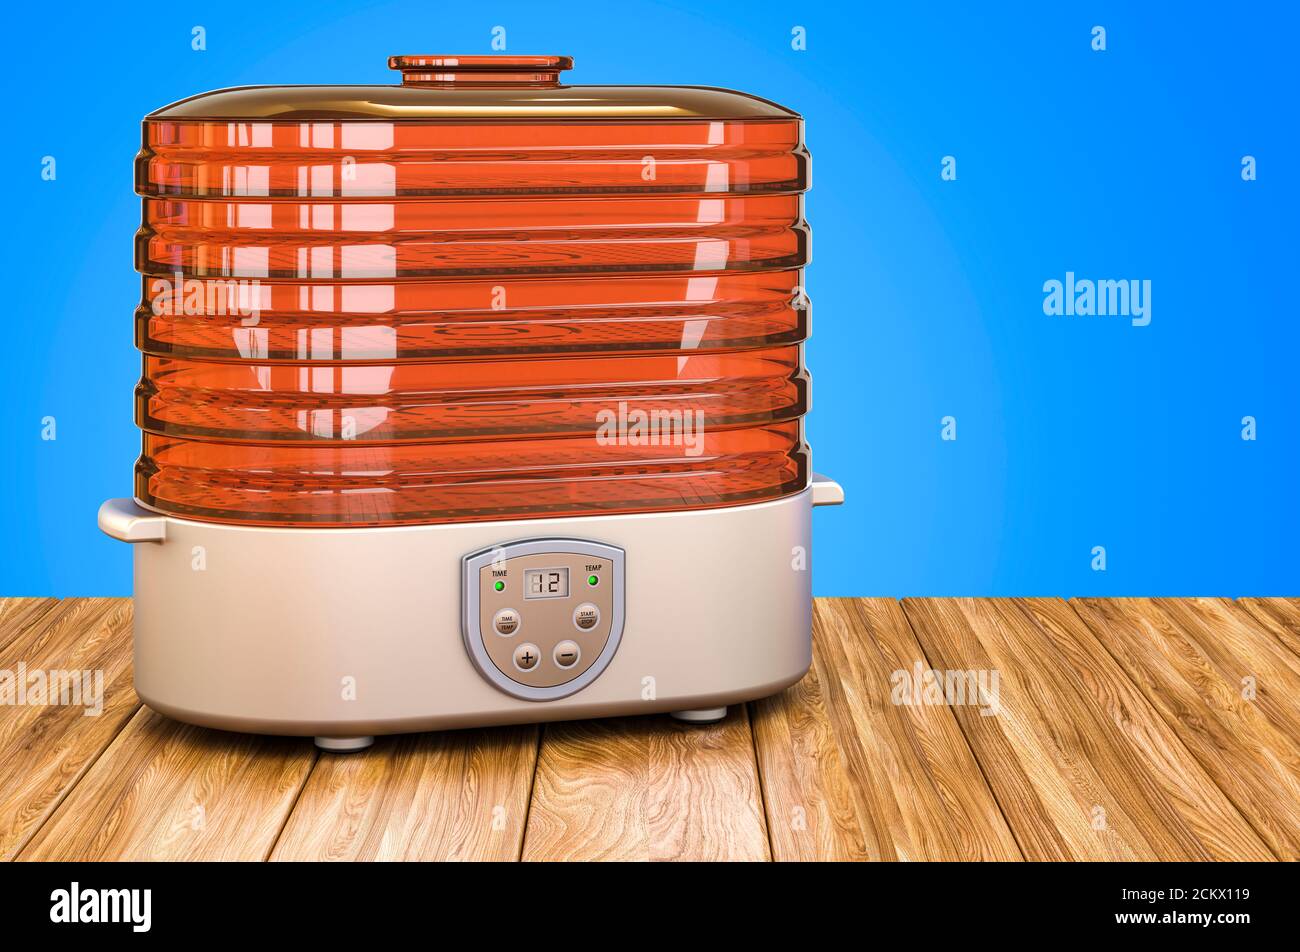 https://c8.alamy.com/comp/2CKX119/electric-food-dehydrator-on-the-wooden-table-3d-rendering-2CKX119.jpg